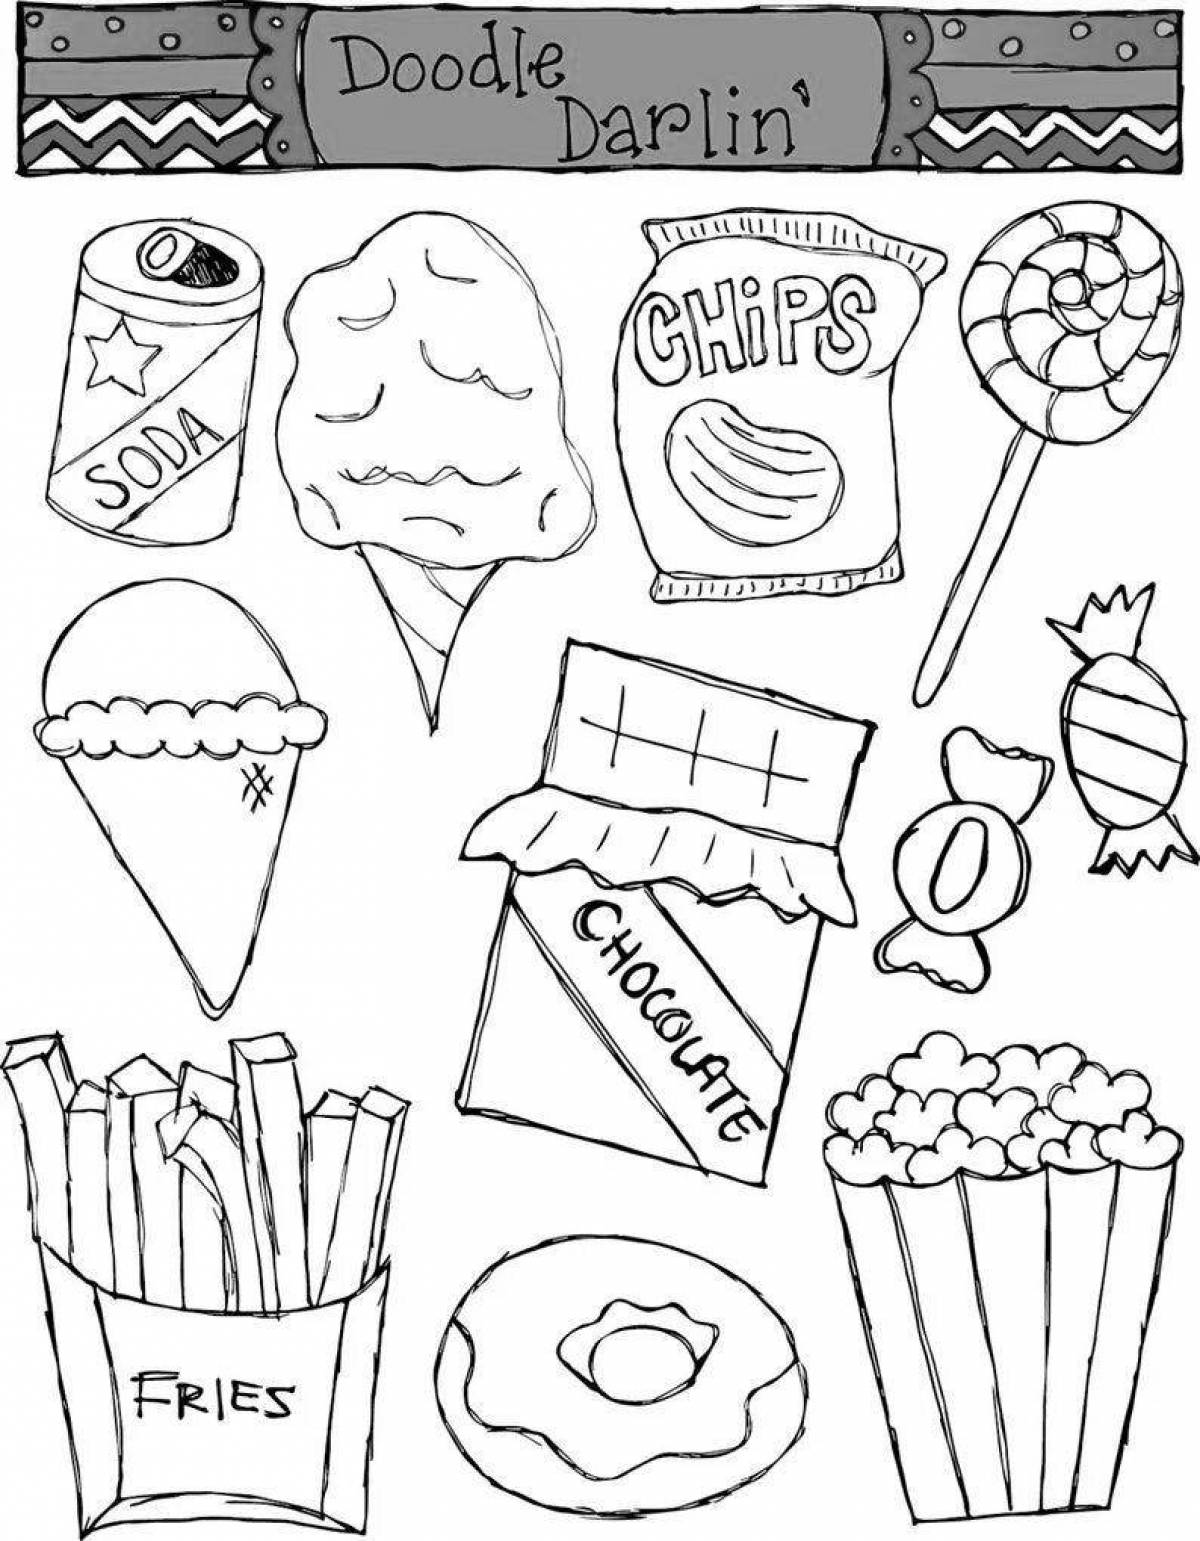 Low fat healthy food coloring page